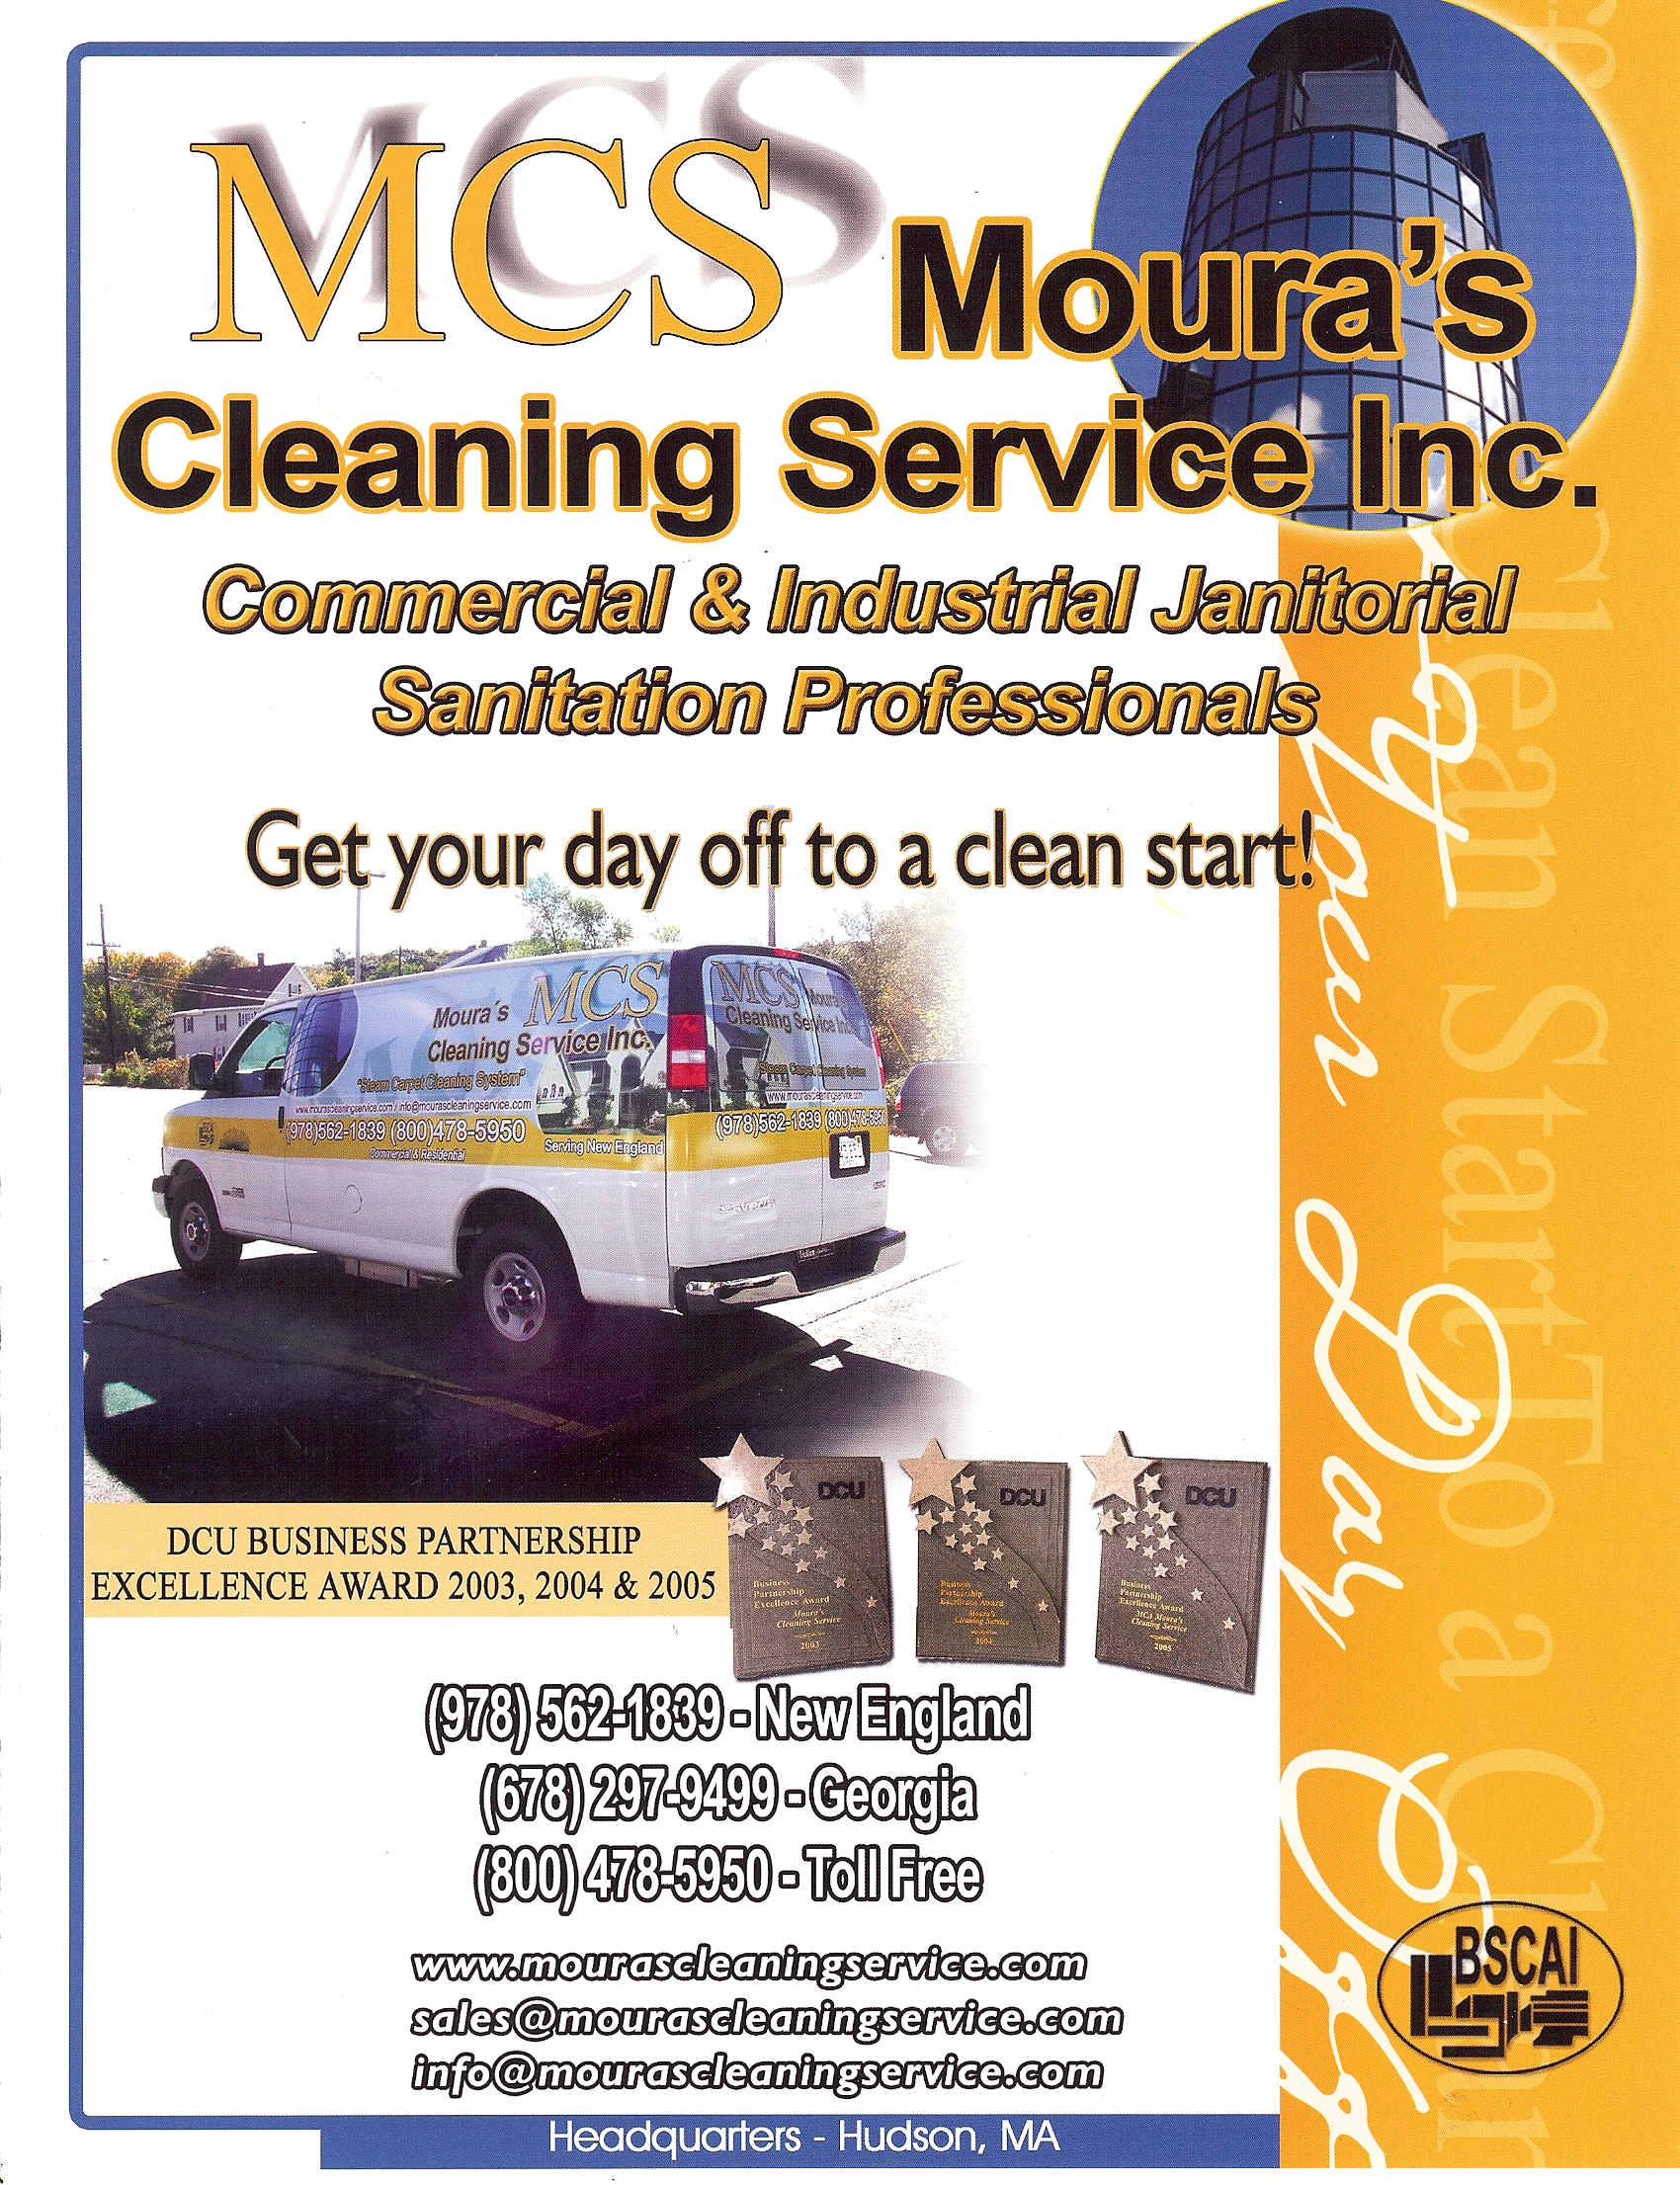 Moura's Cleaning Service Inc. 
978-562-1839
mourascleaningservice.com
Hudson, MA